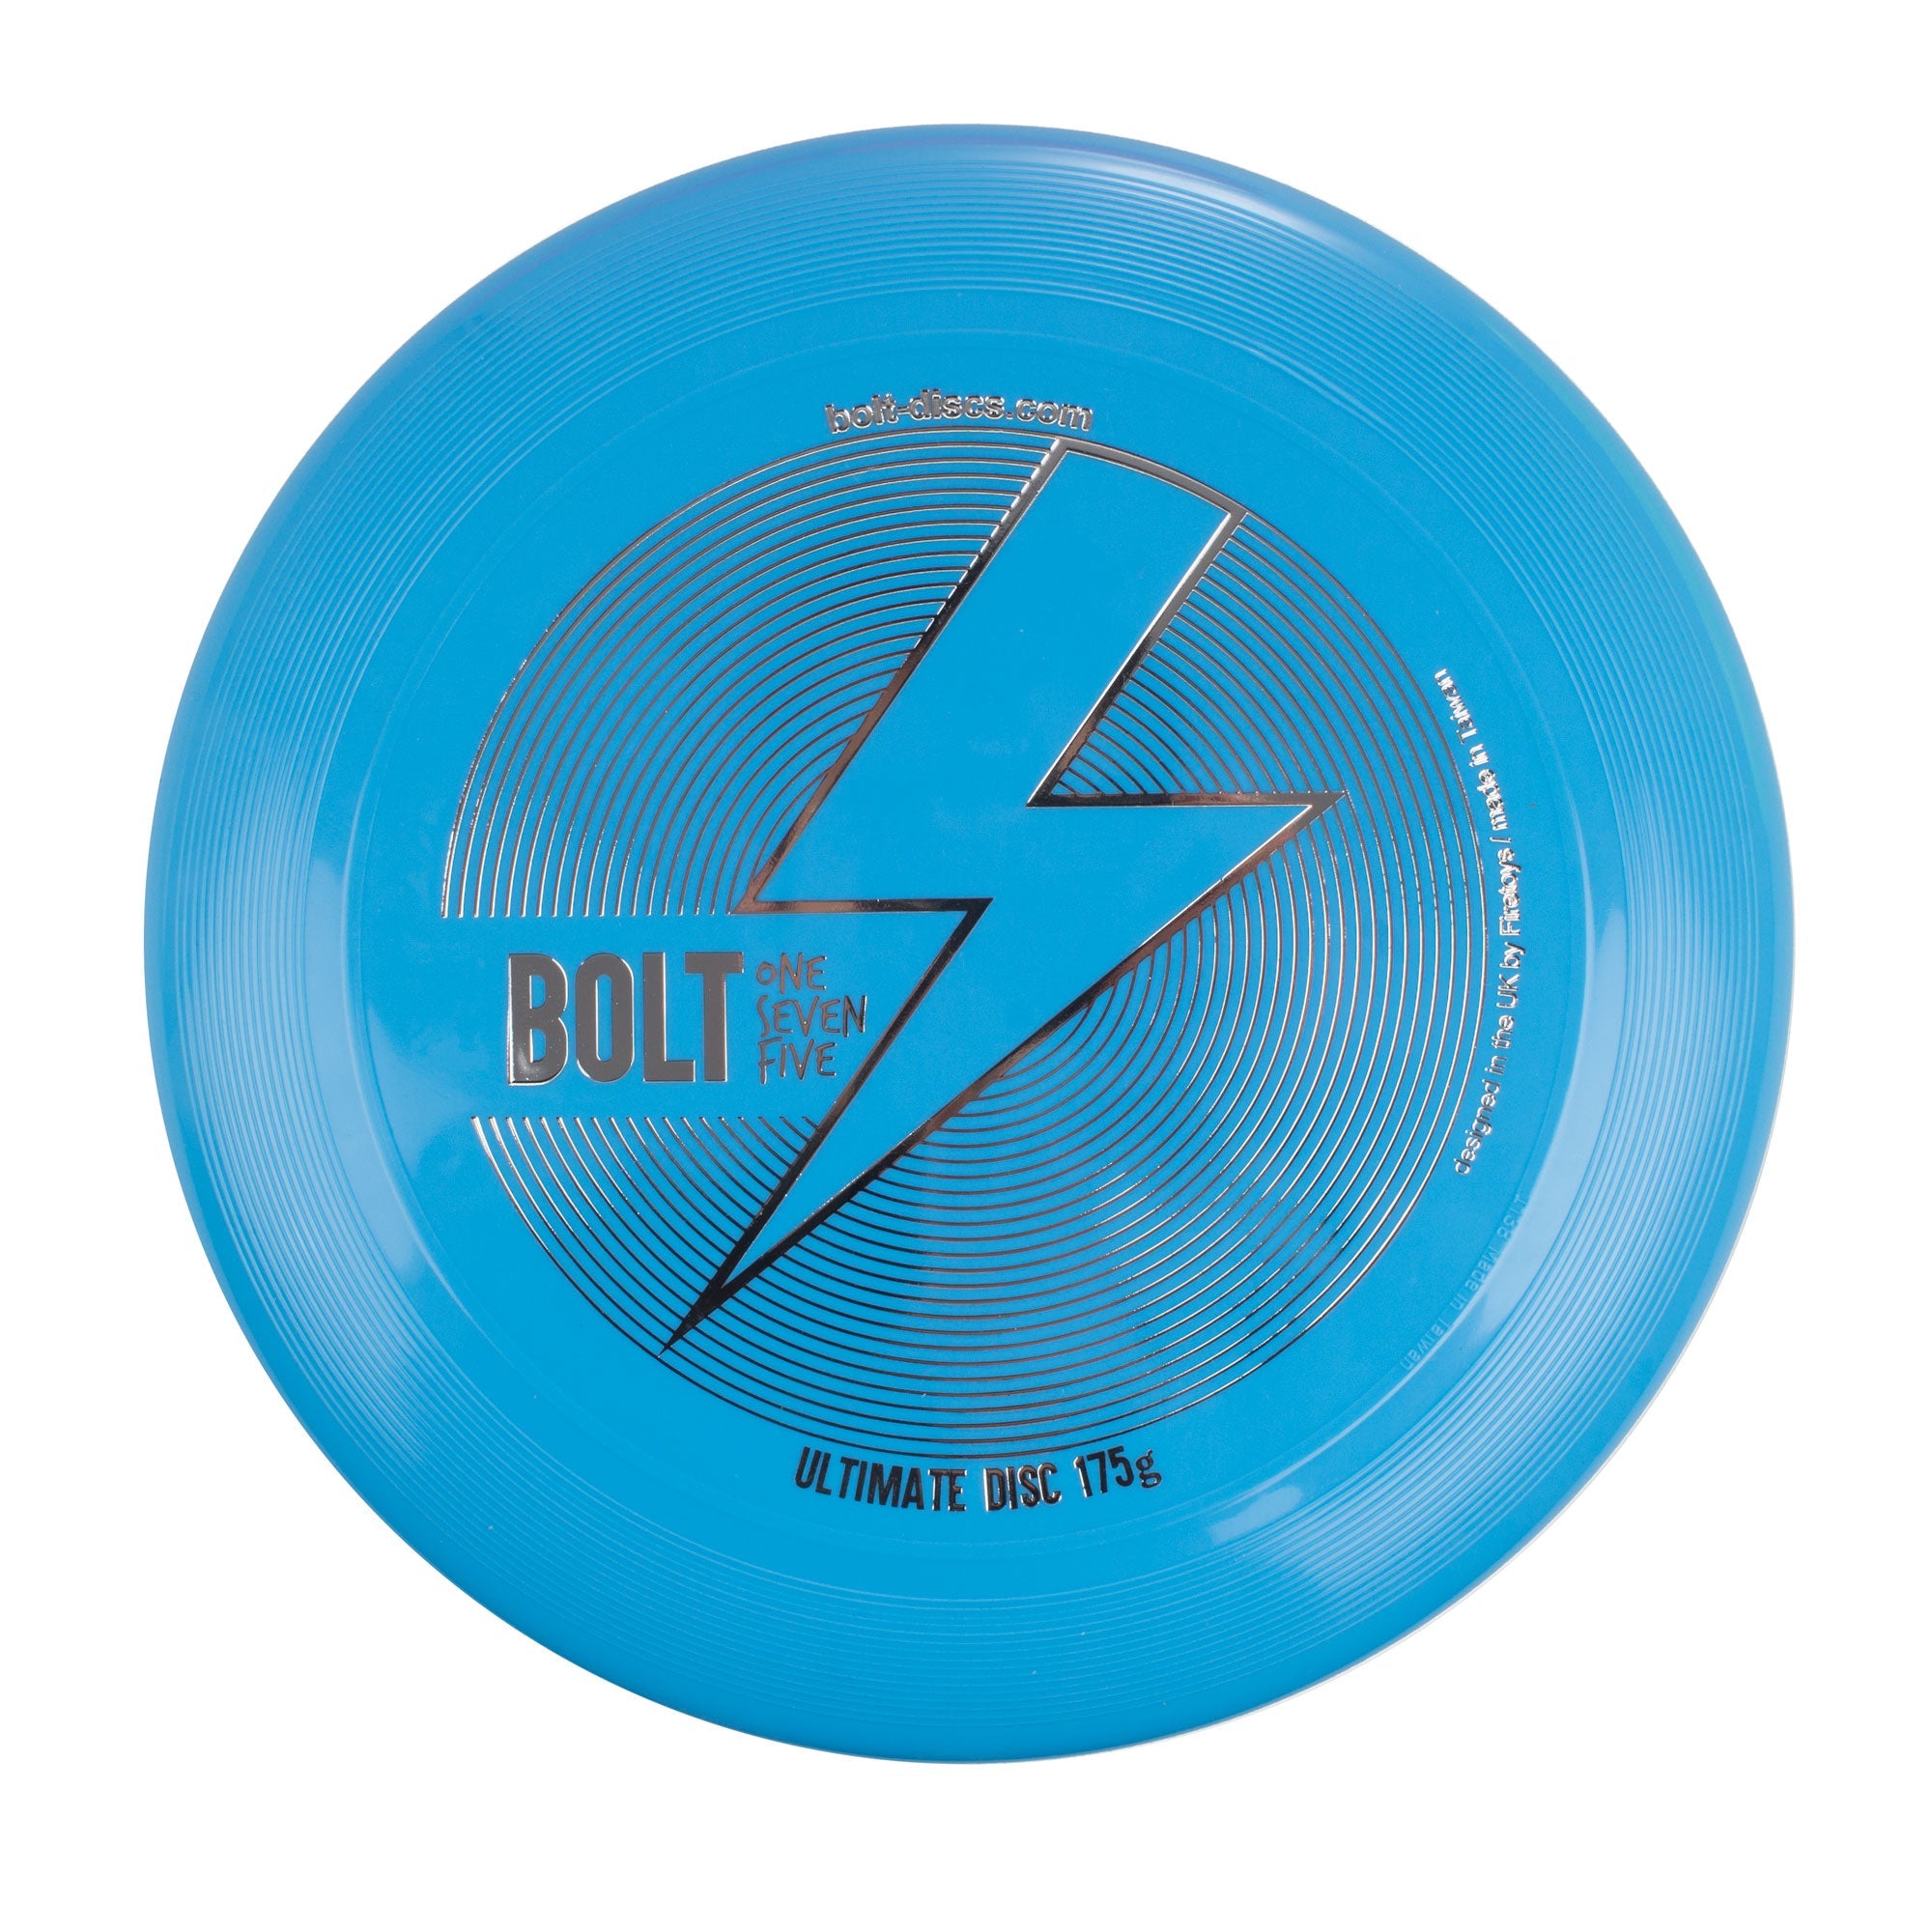 Blue BOLT frisbee from a front angle